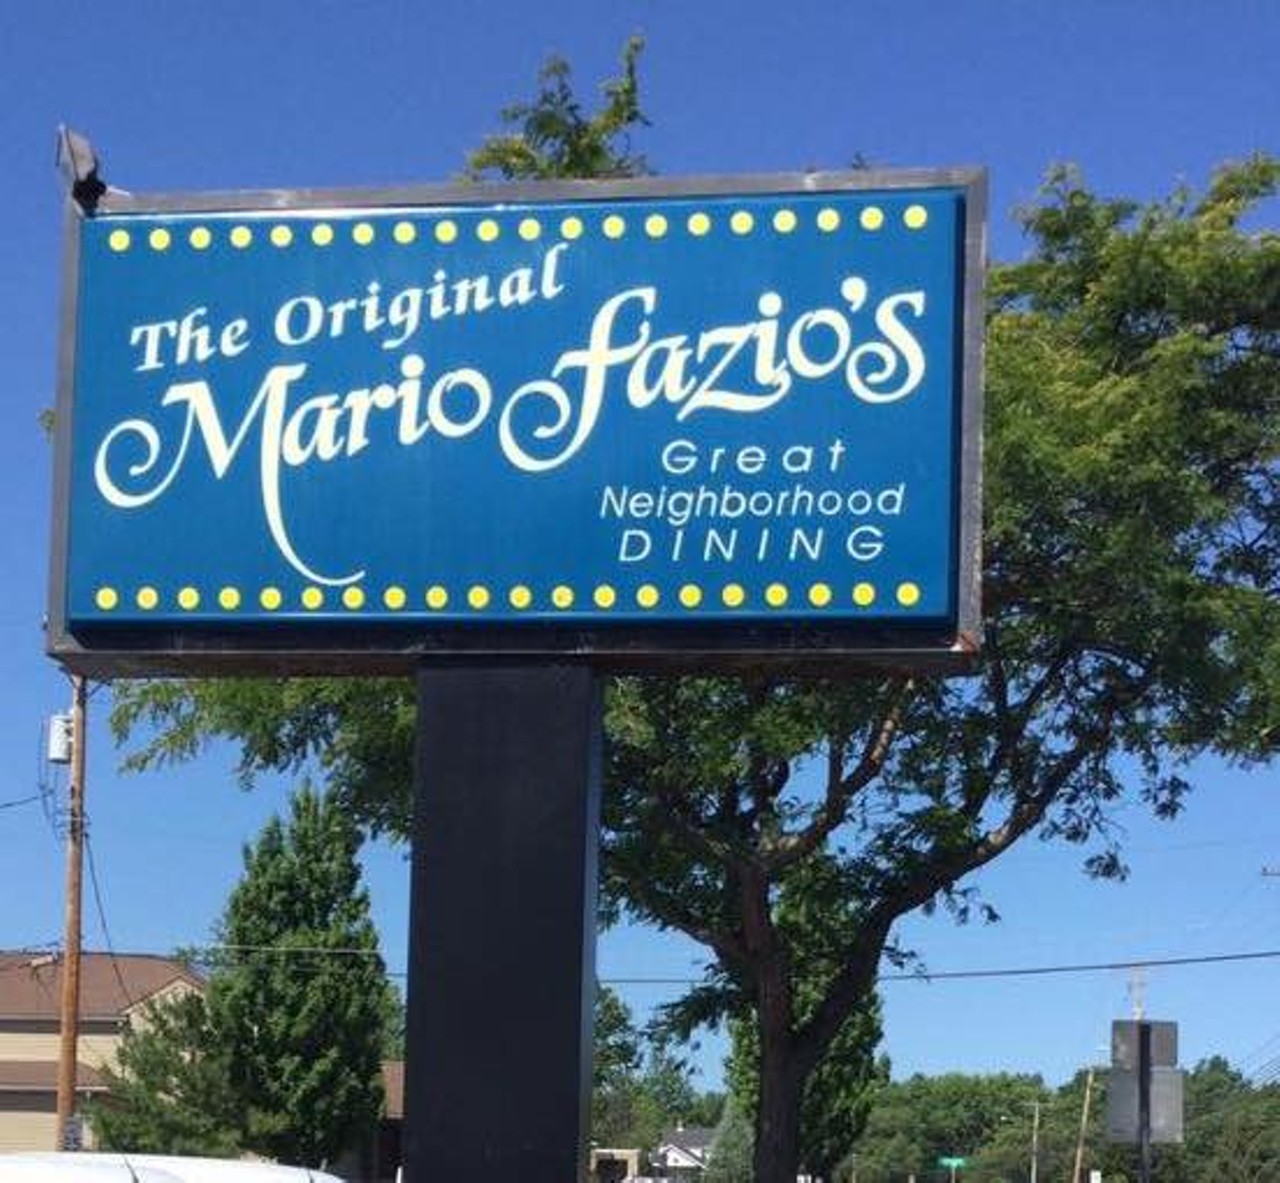  Mario Fazio&#146;s 
34400 Chardon Rd., Willoughby
Out in Willoughby, this old school Italian joint is offering a $50, $75 and $100 dollar package to feed families of 4. All packages come with garlic bread and sauce, salad and casata cake and the $50 comes with a choice of pasta, the $75 with different chicken dishes and the $100 with more expensive entrees like middleneck clam pasta, shrimp pasta or veal cutlets with cavatelli.
Photo via Mario Fazio&#146;s/Facebook